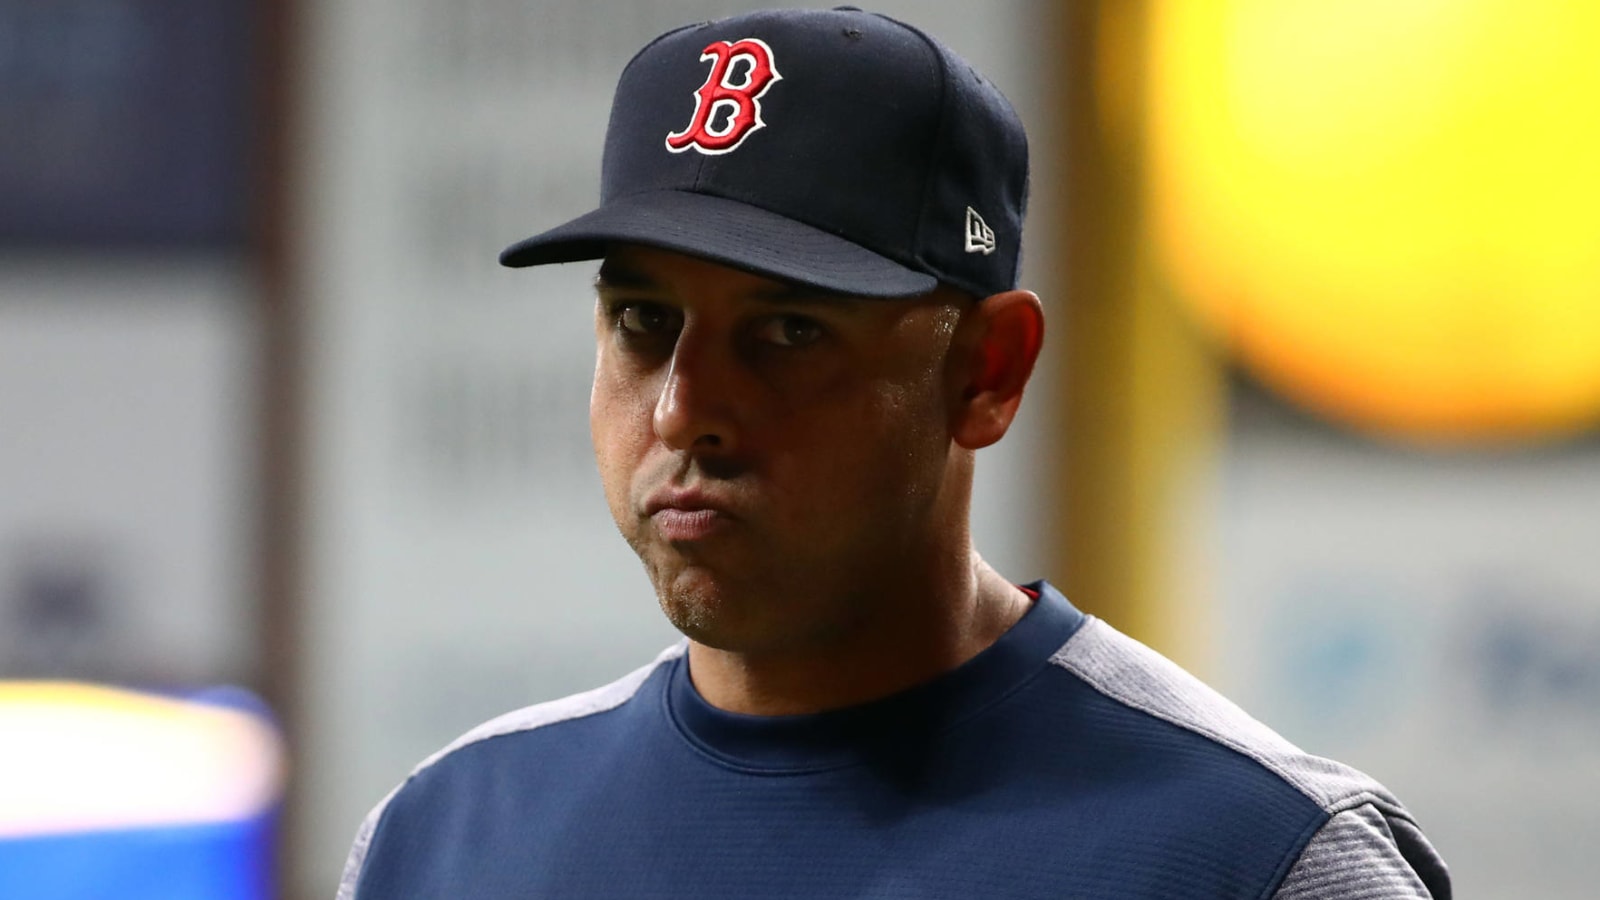 Alex Cora suspended for 2020 season for actions with Astros, not Red Sox